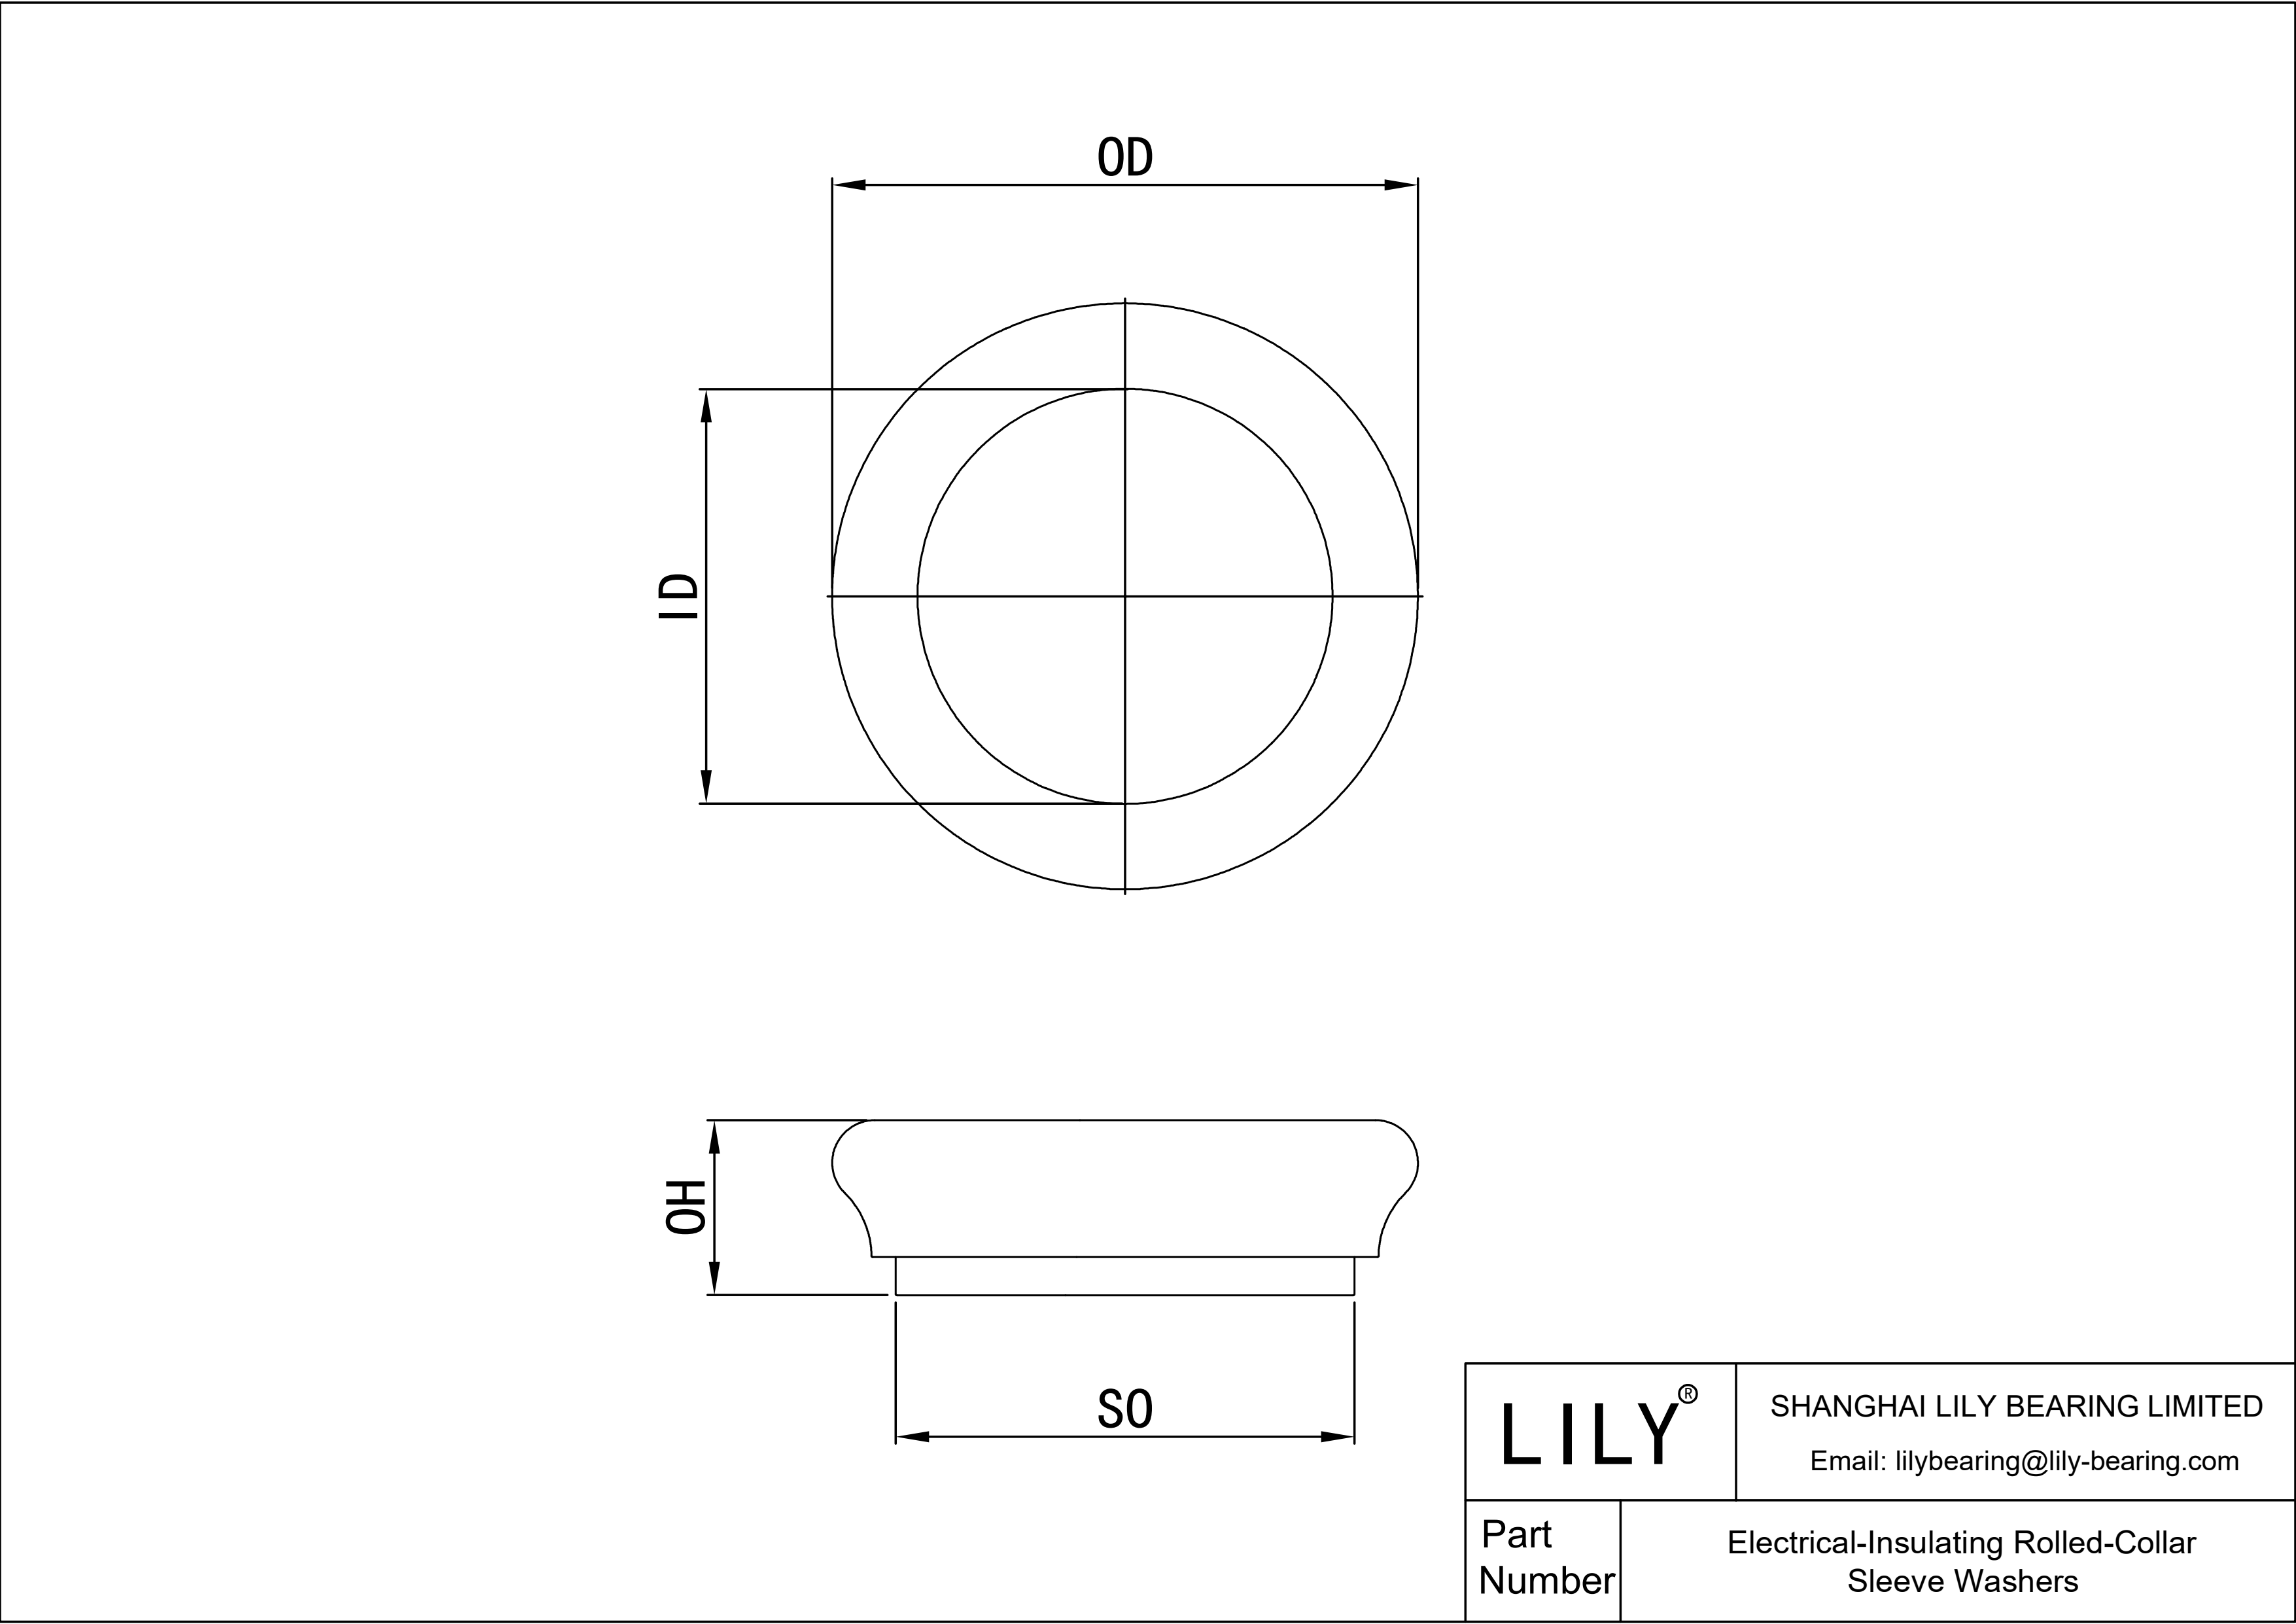 JAAJHABGJ Electrical-Insulating Rolled-Collar Sleeve Washers cad drawing